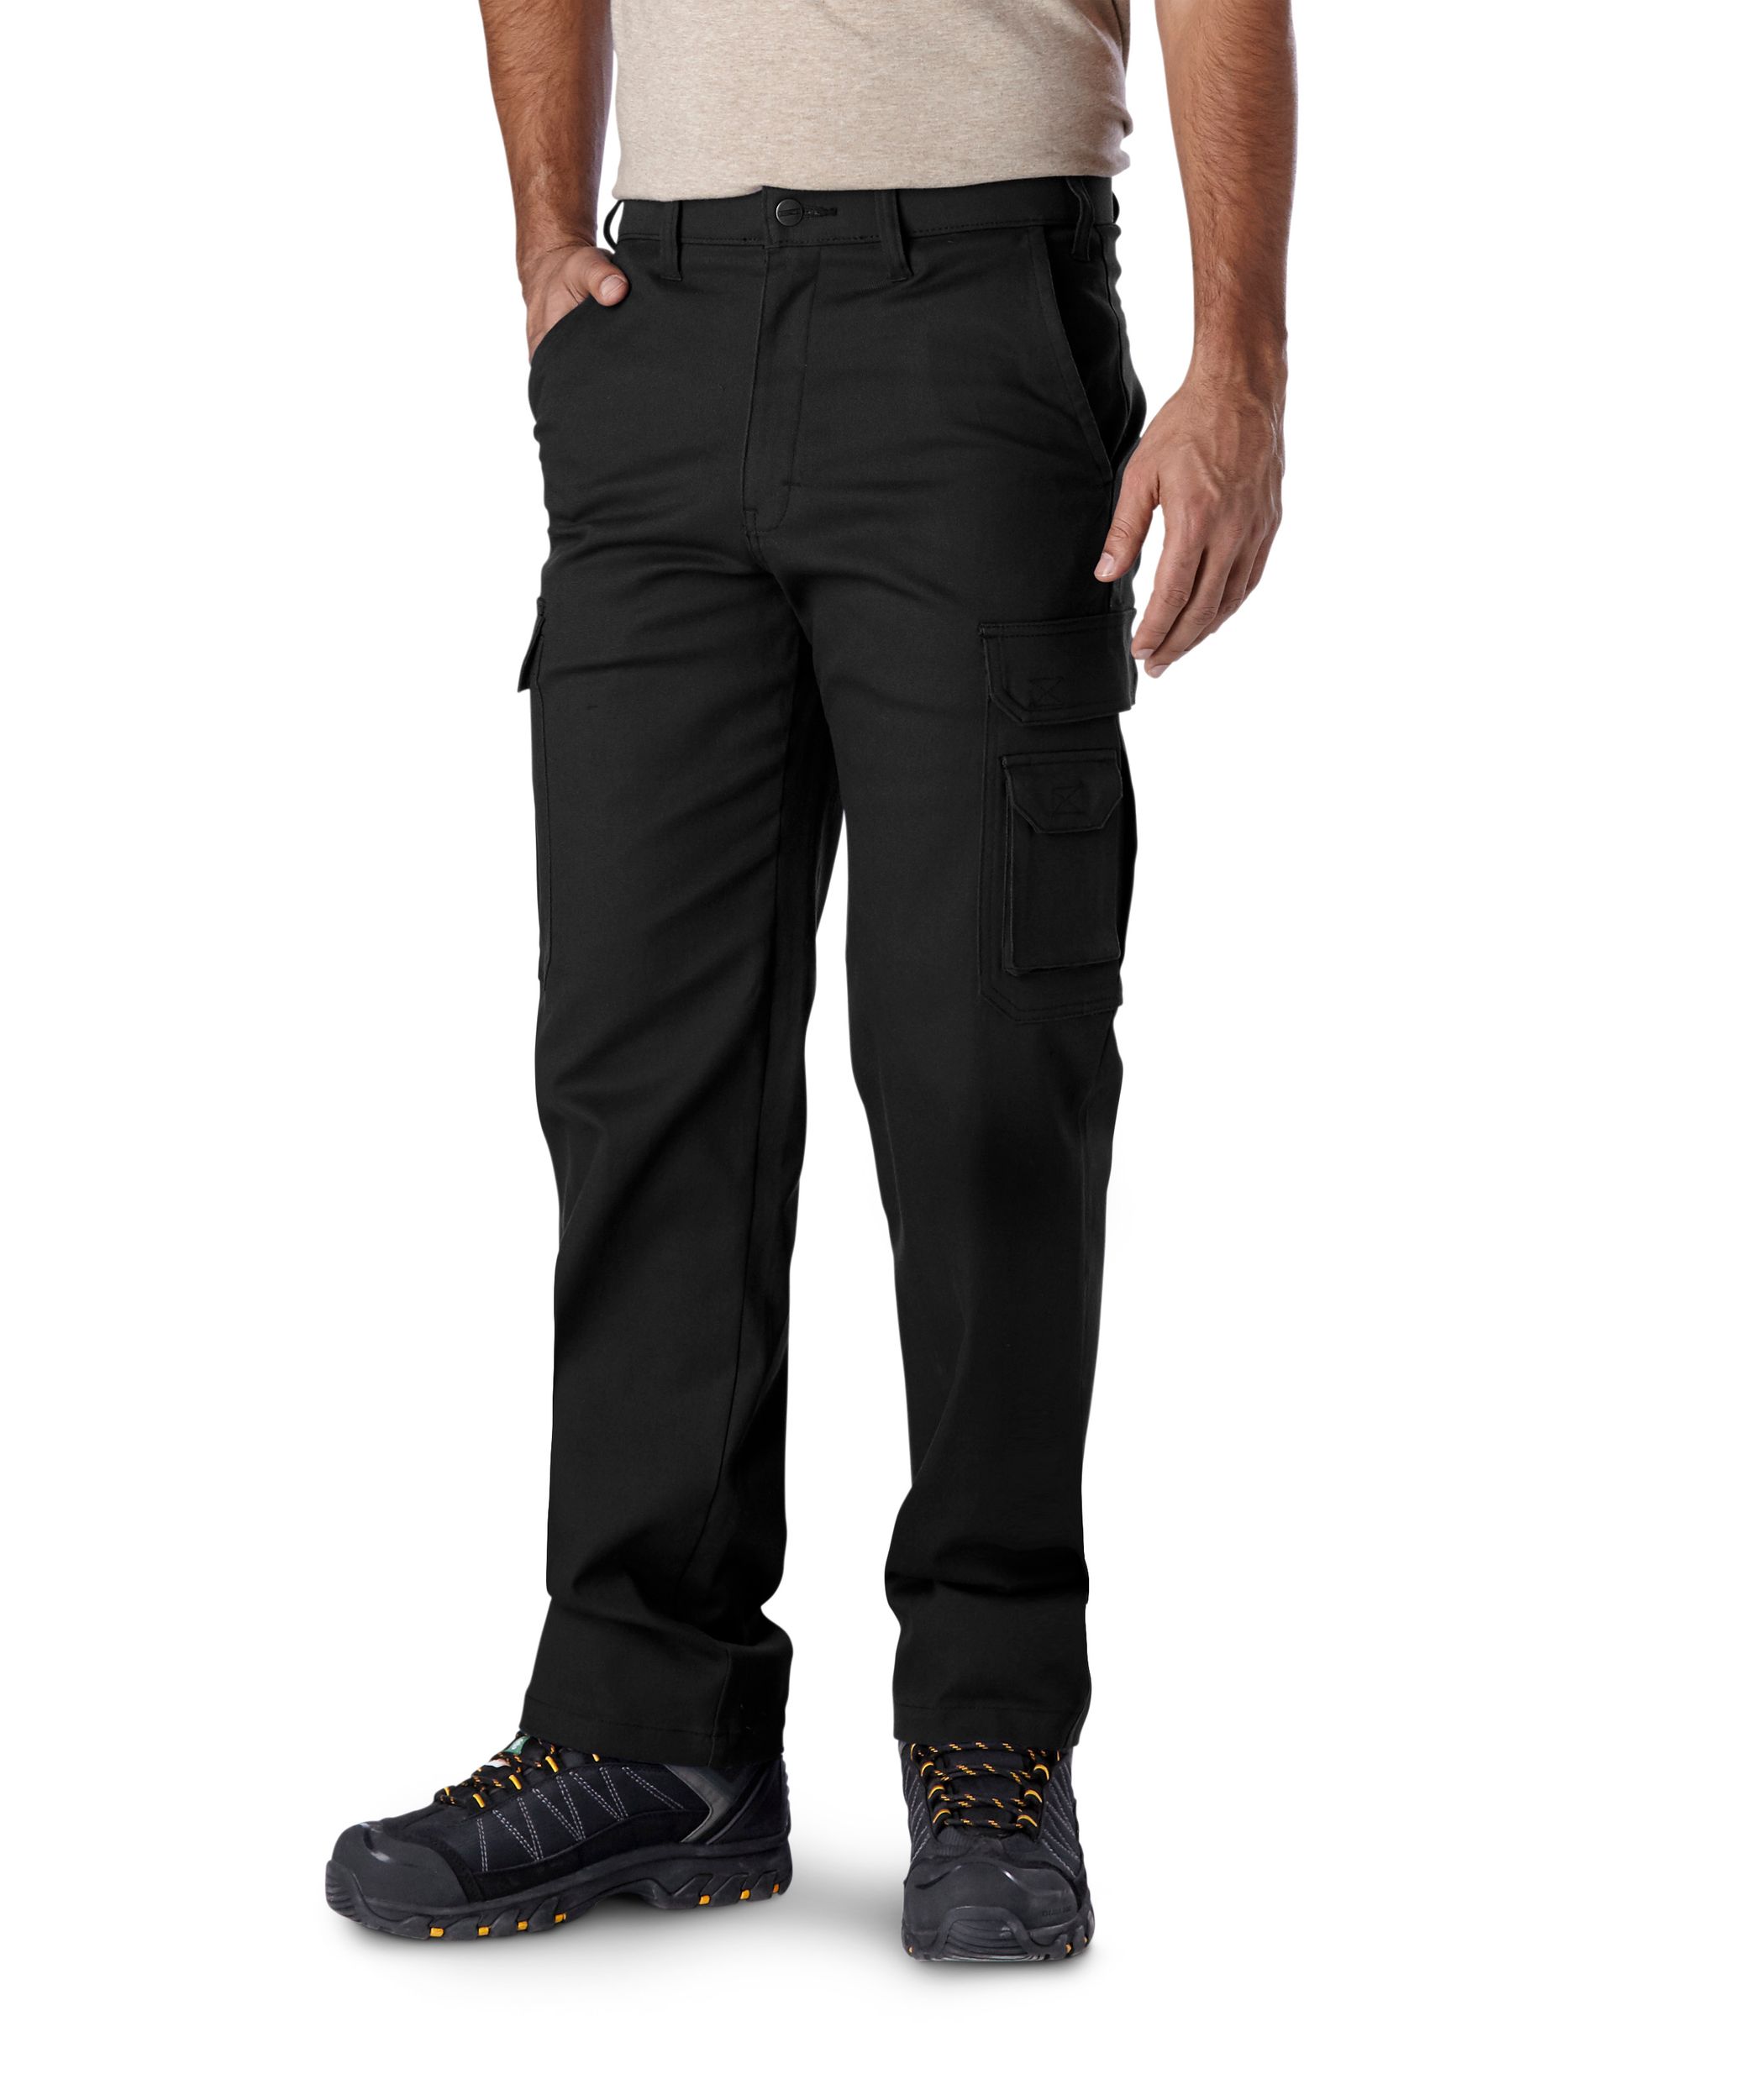 5.11 Tactical Women's Stryke Pants | 5.11® Tactical Official Site